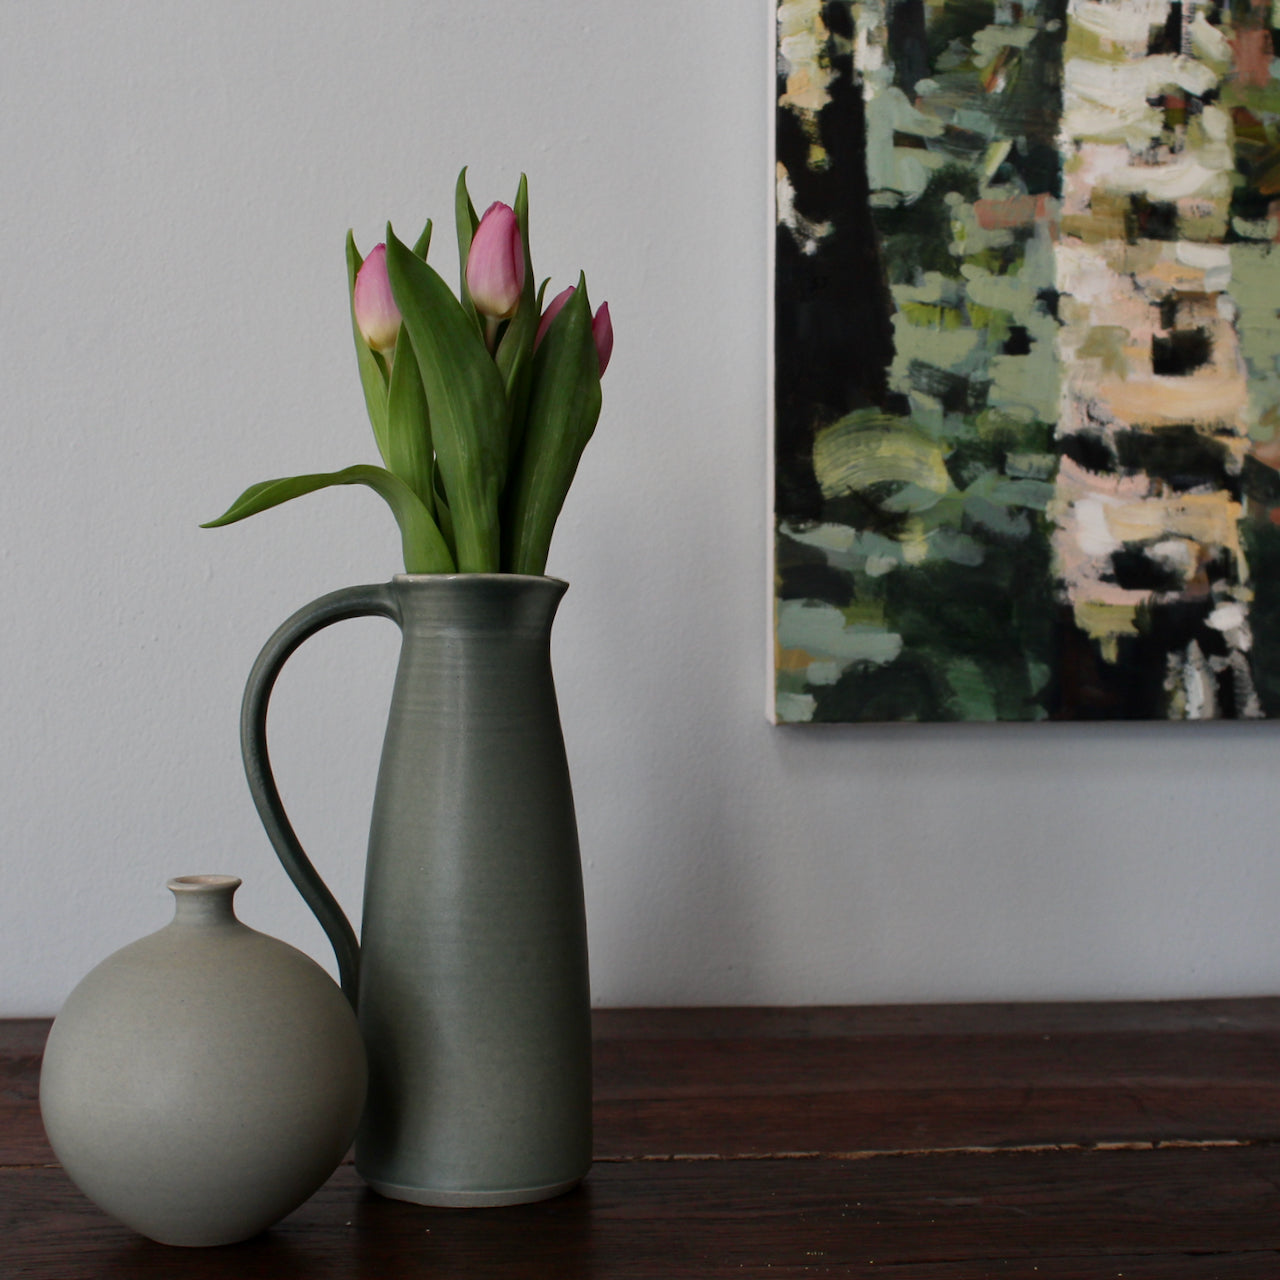 pale green bottle and a darker green jug with tulips in it on a wooden table with corner or a painting visible 